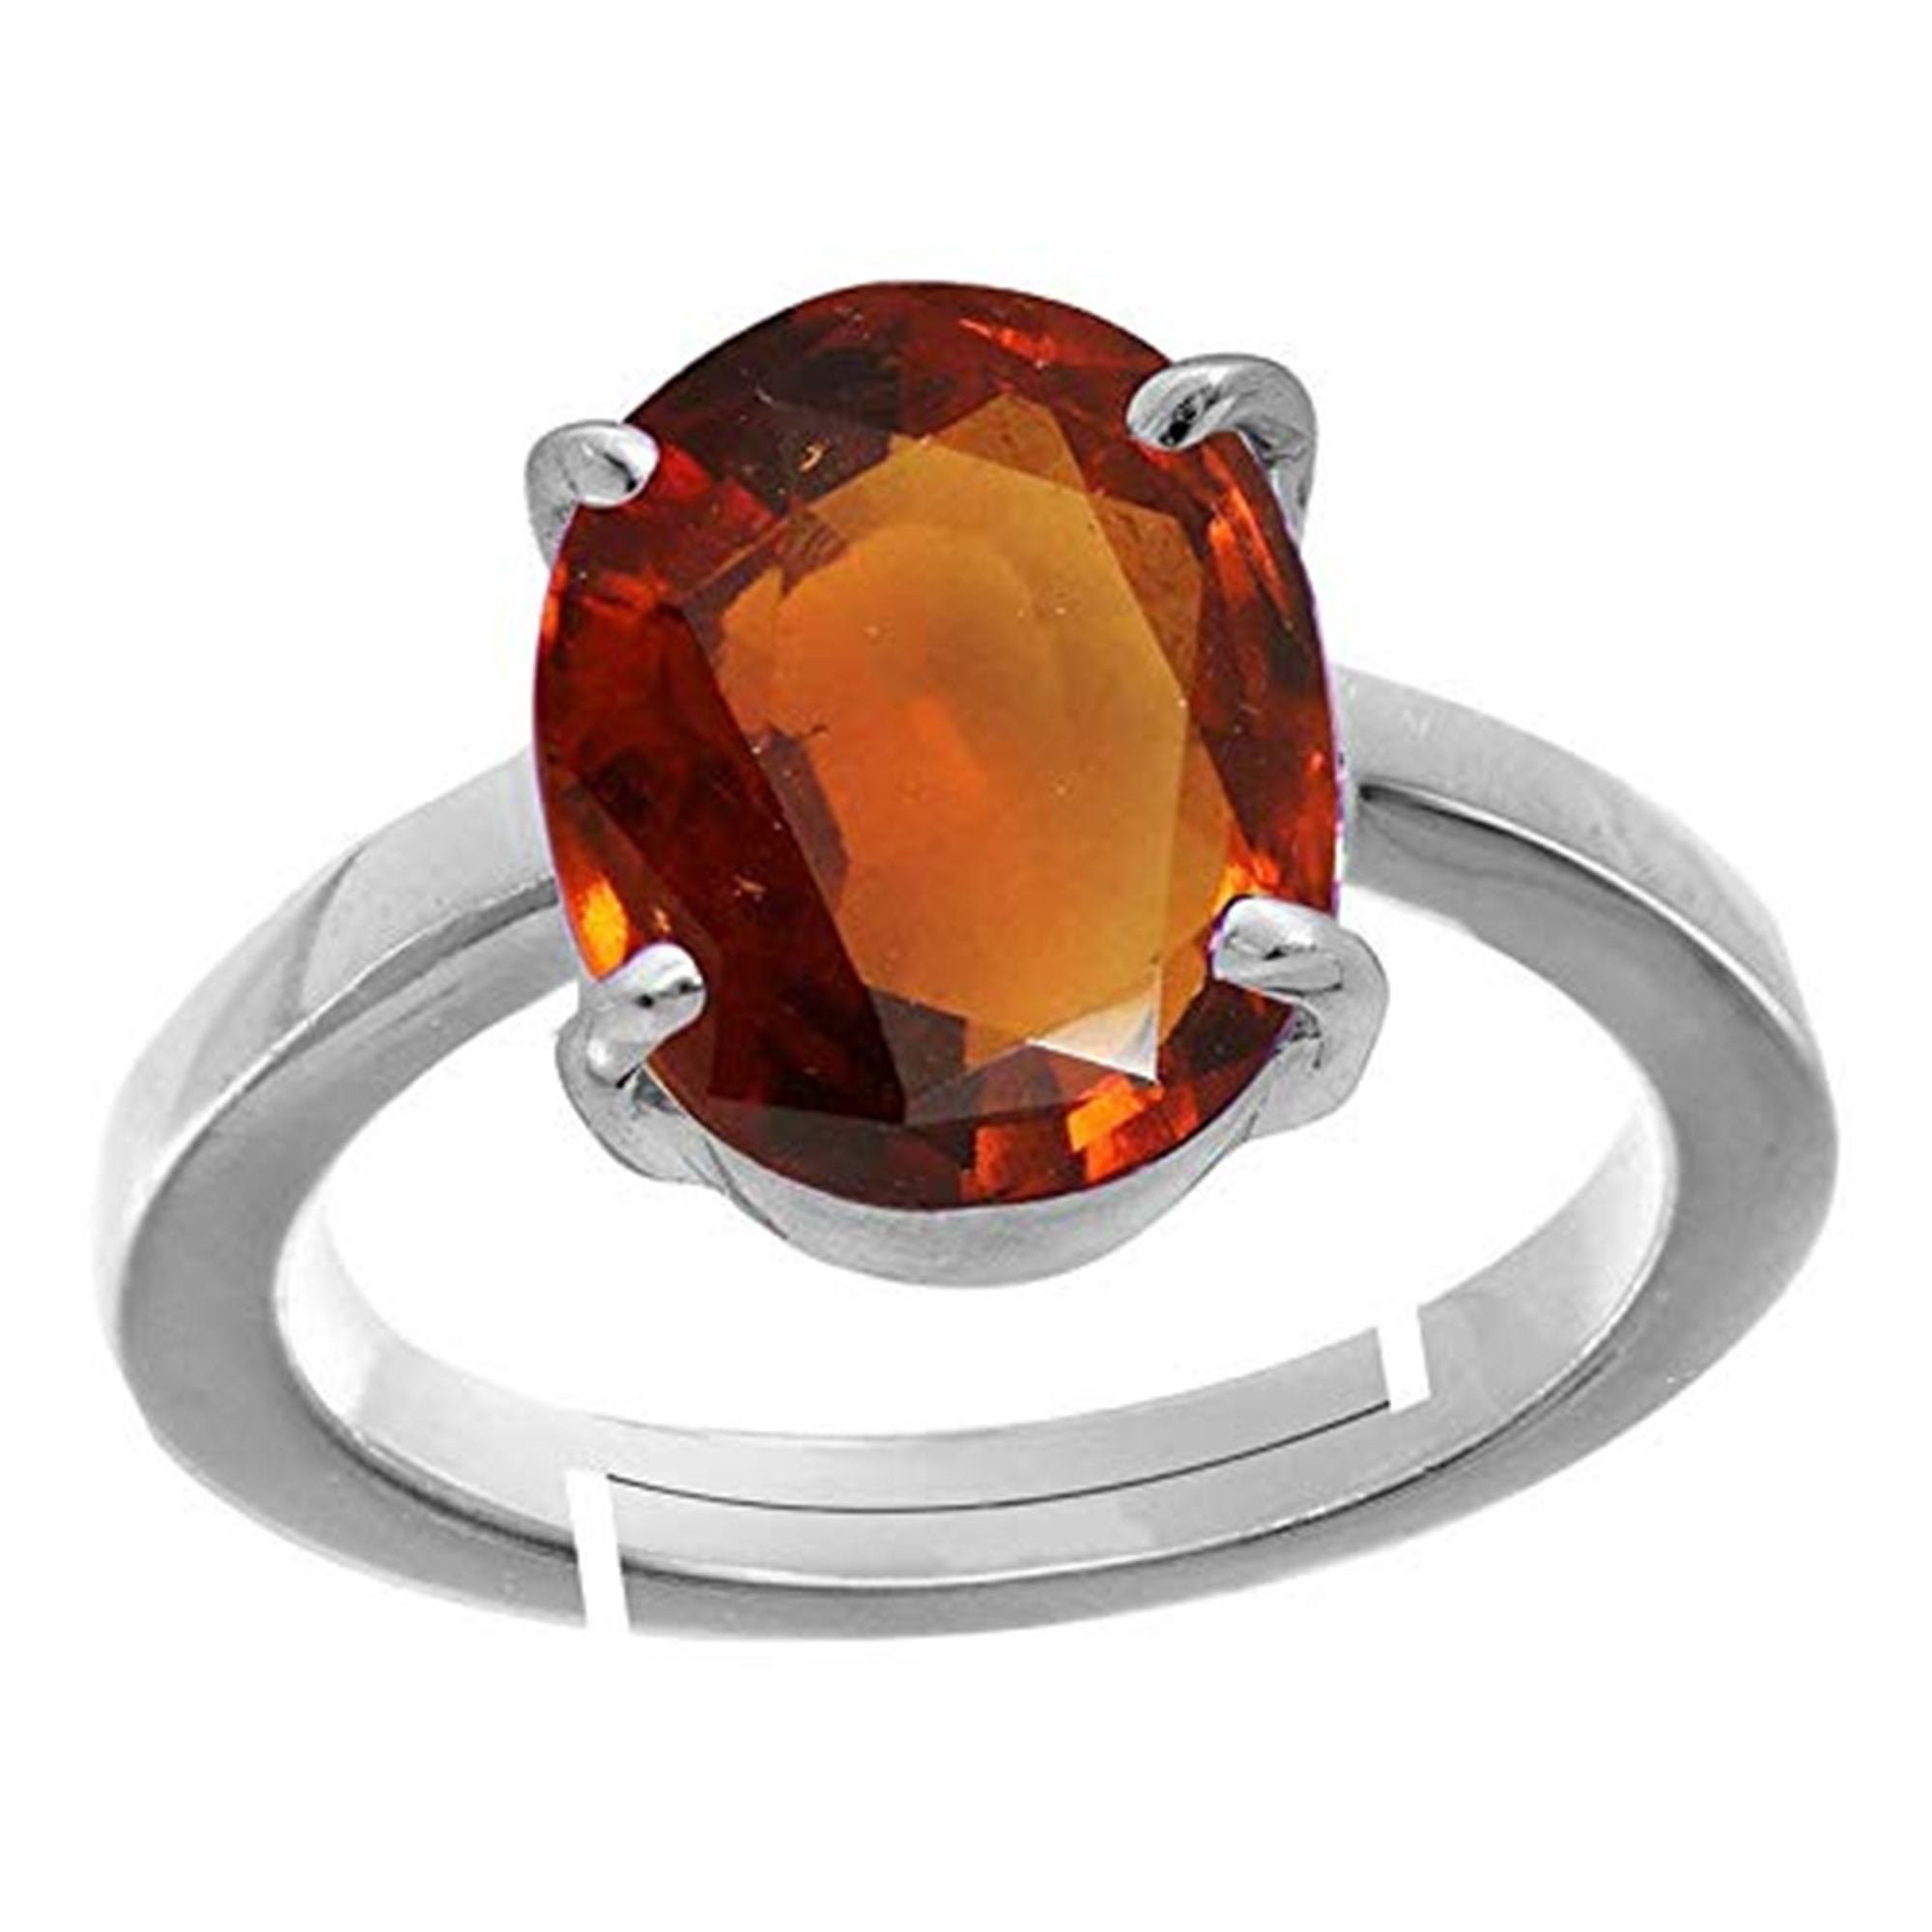 SIDHARTH GEMS Gomed Ring 5.25 Ratti 4.00 Carat Natural and Certified  Hessonite Garnet (Gomed) Astrological Gemstone Adjustable for Men And Women  : Amazon.in: Jewellery